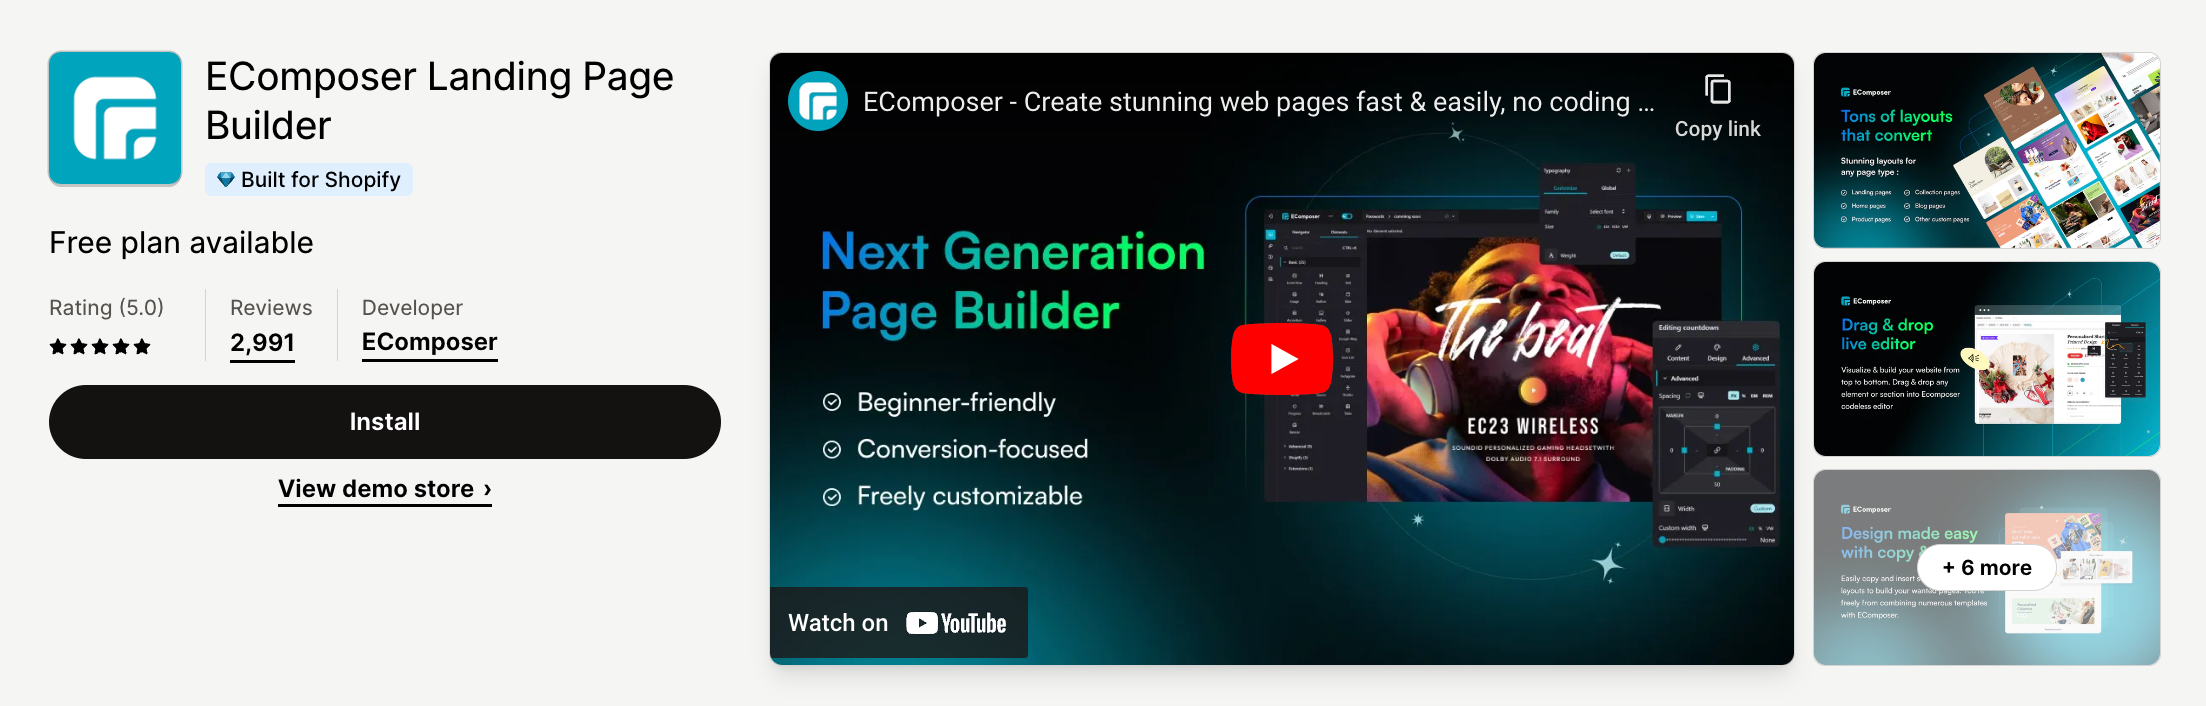 EComposer Page Builder